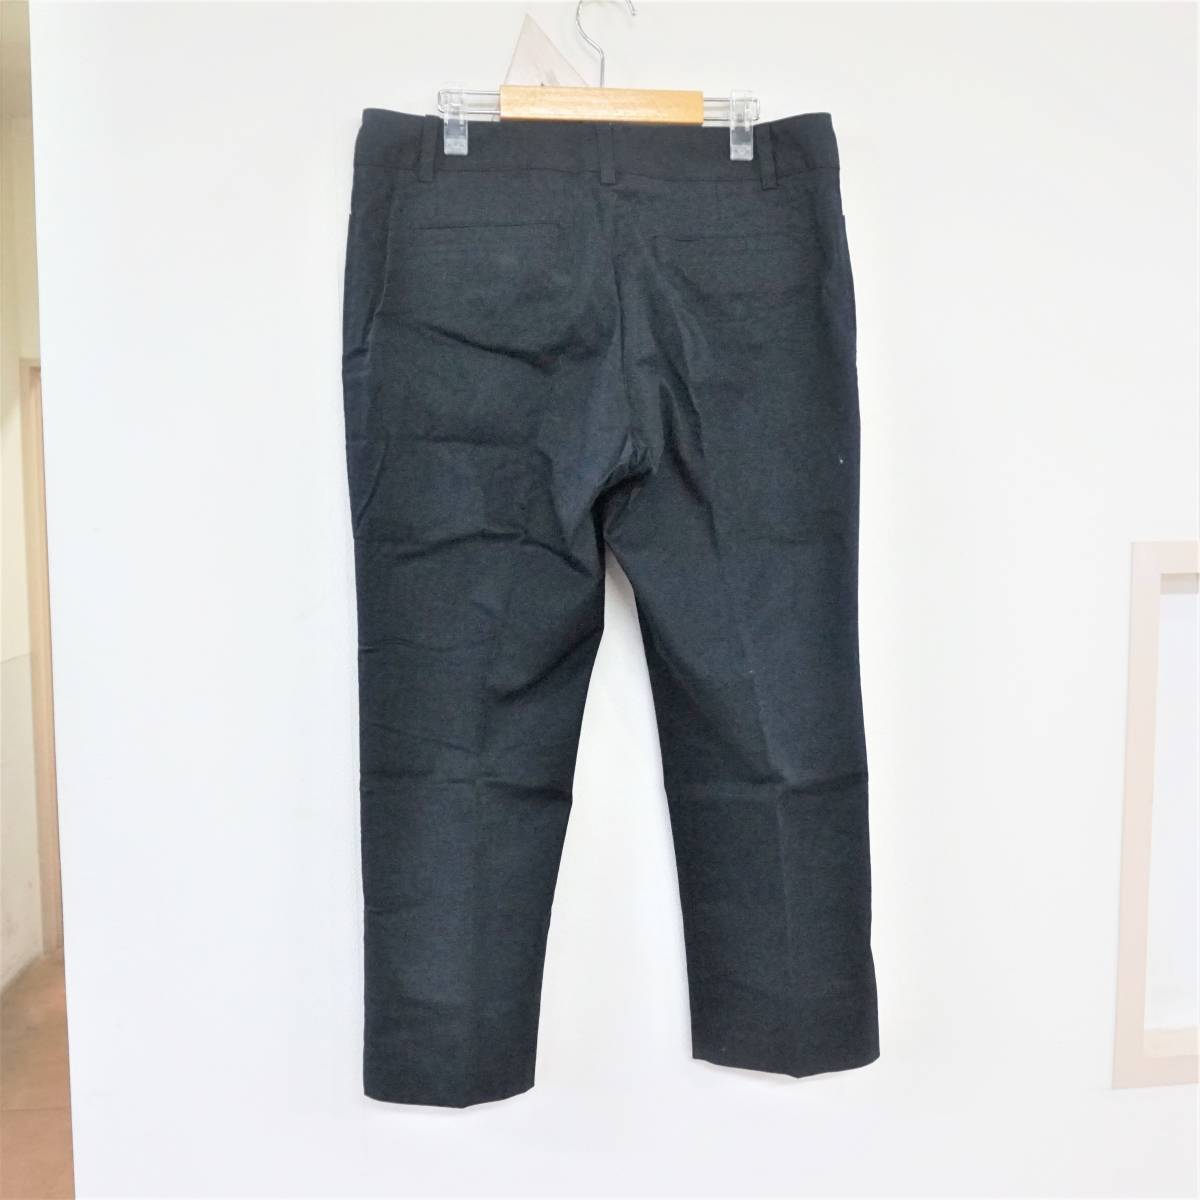  with translation INED Ined casual pants trousers slacks 15 number 3L size black cotton cotton 4805673